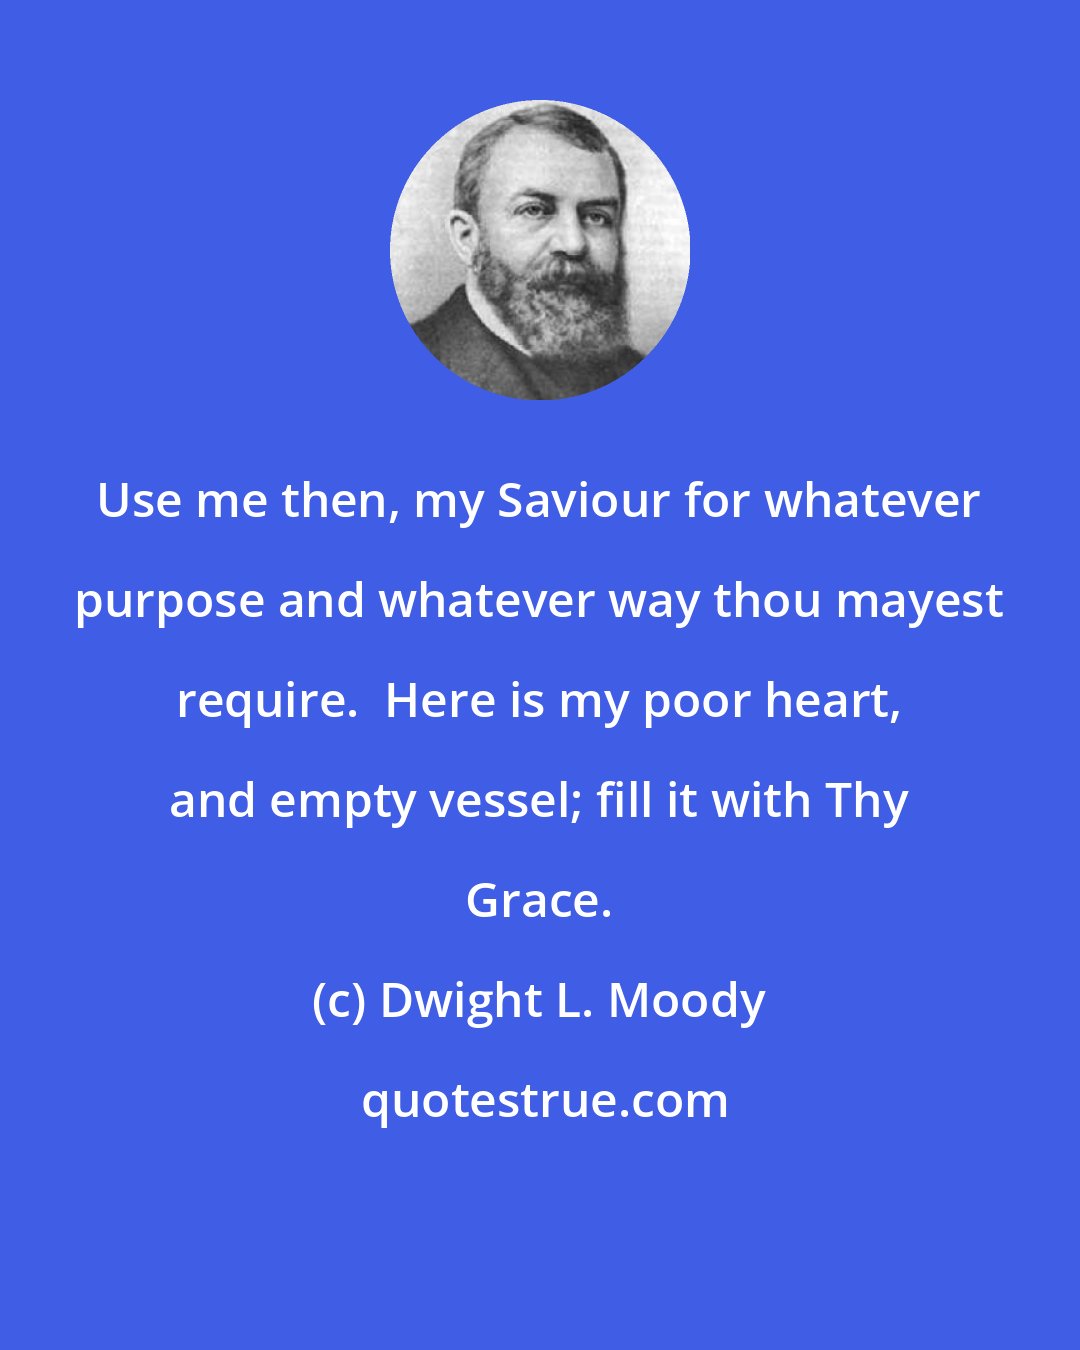 Dwight L. Moody: Use me then, my Saviour for whatever purpose and whatever way thou mayest require.  Here is my poor heart, and empty vessel; fill it with Thy Grace.